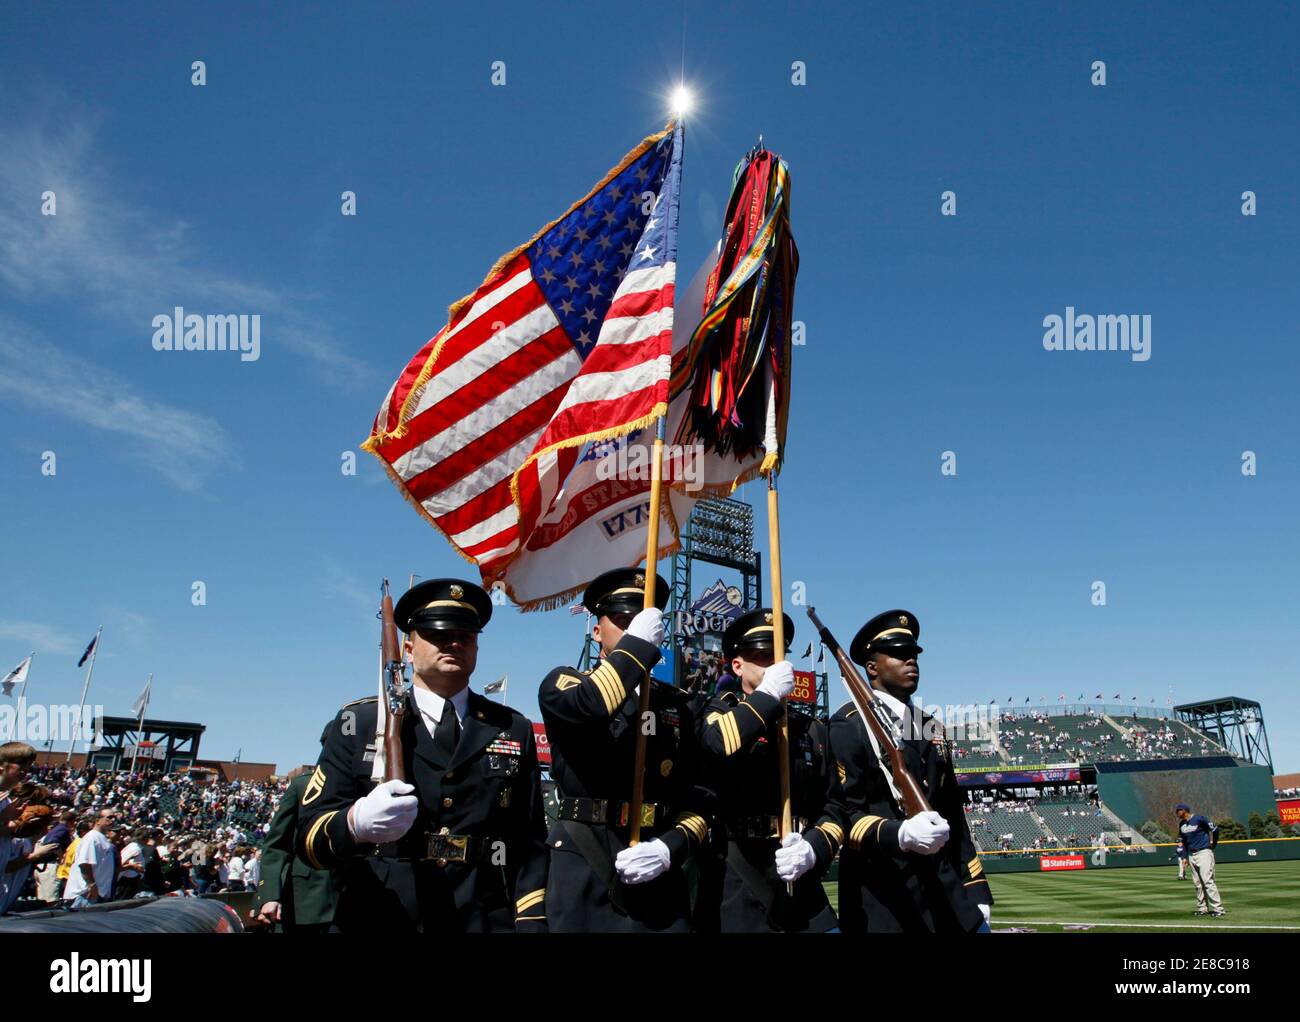 The color guard takes the field before the MLB baseball game between the Colorado Rockies and San Diego Padres in Denver April 9, 2010. REUTERS/Rick Wilking (UNITED STATES - Tags: SPORT BASEBALL) Stock Photo